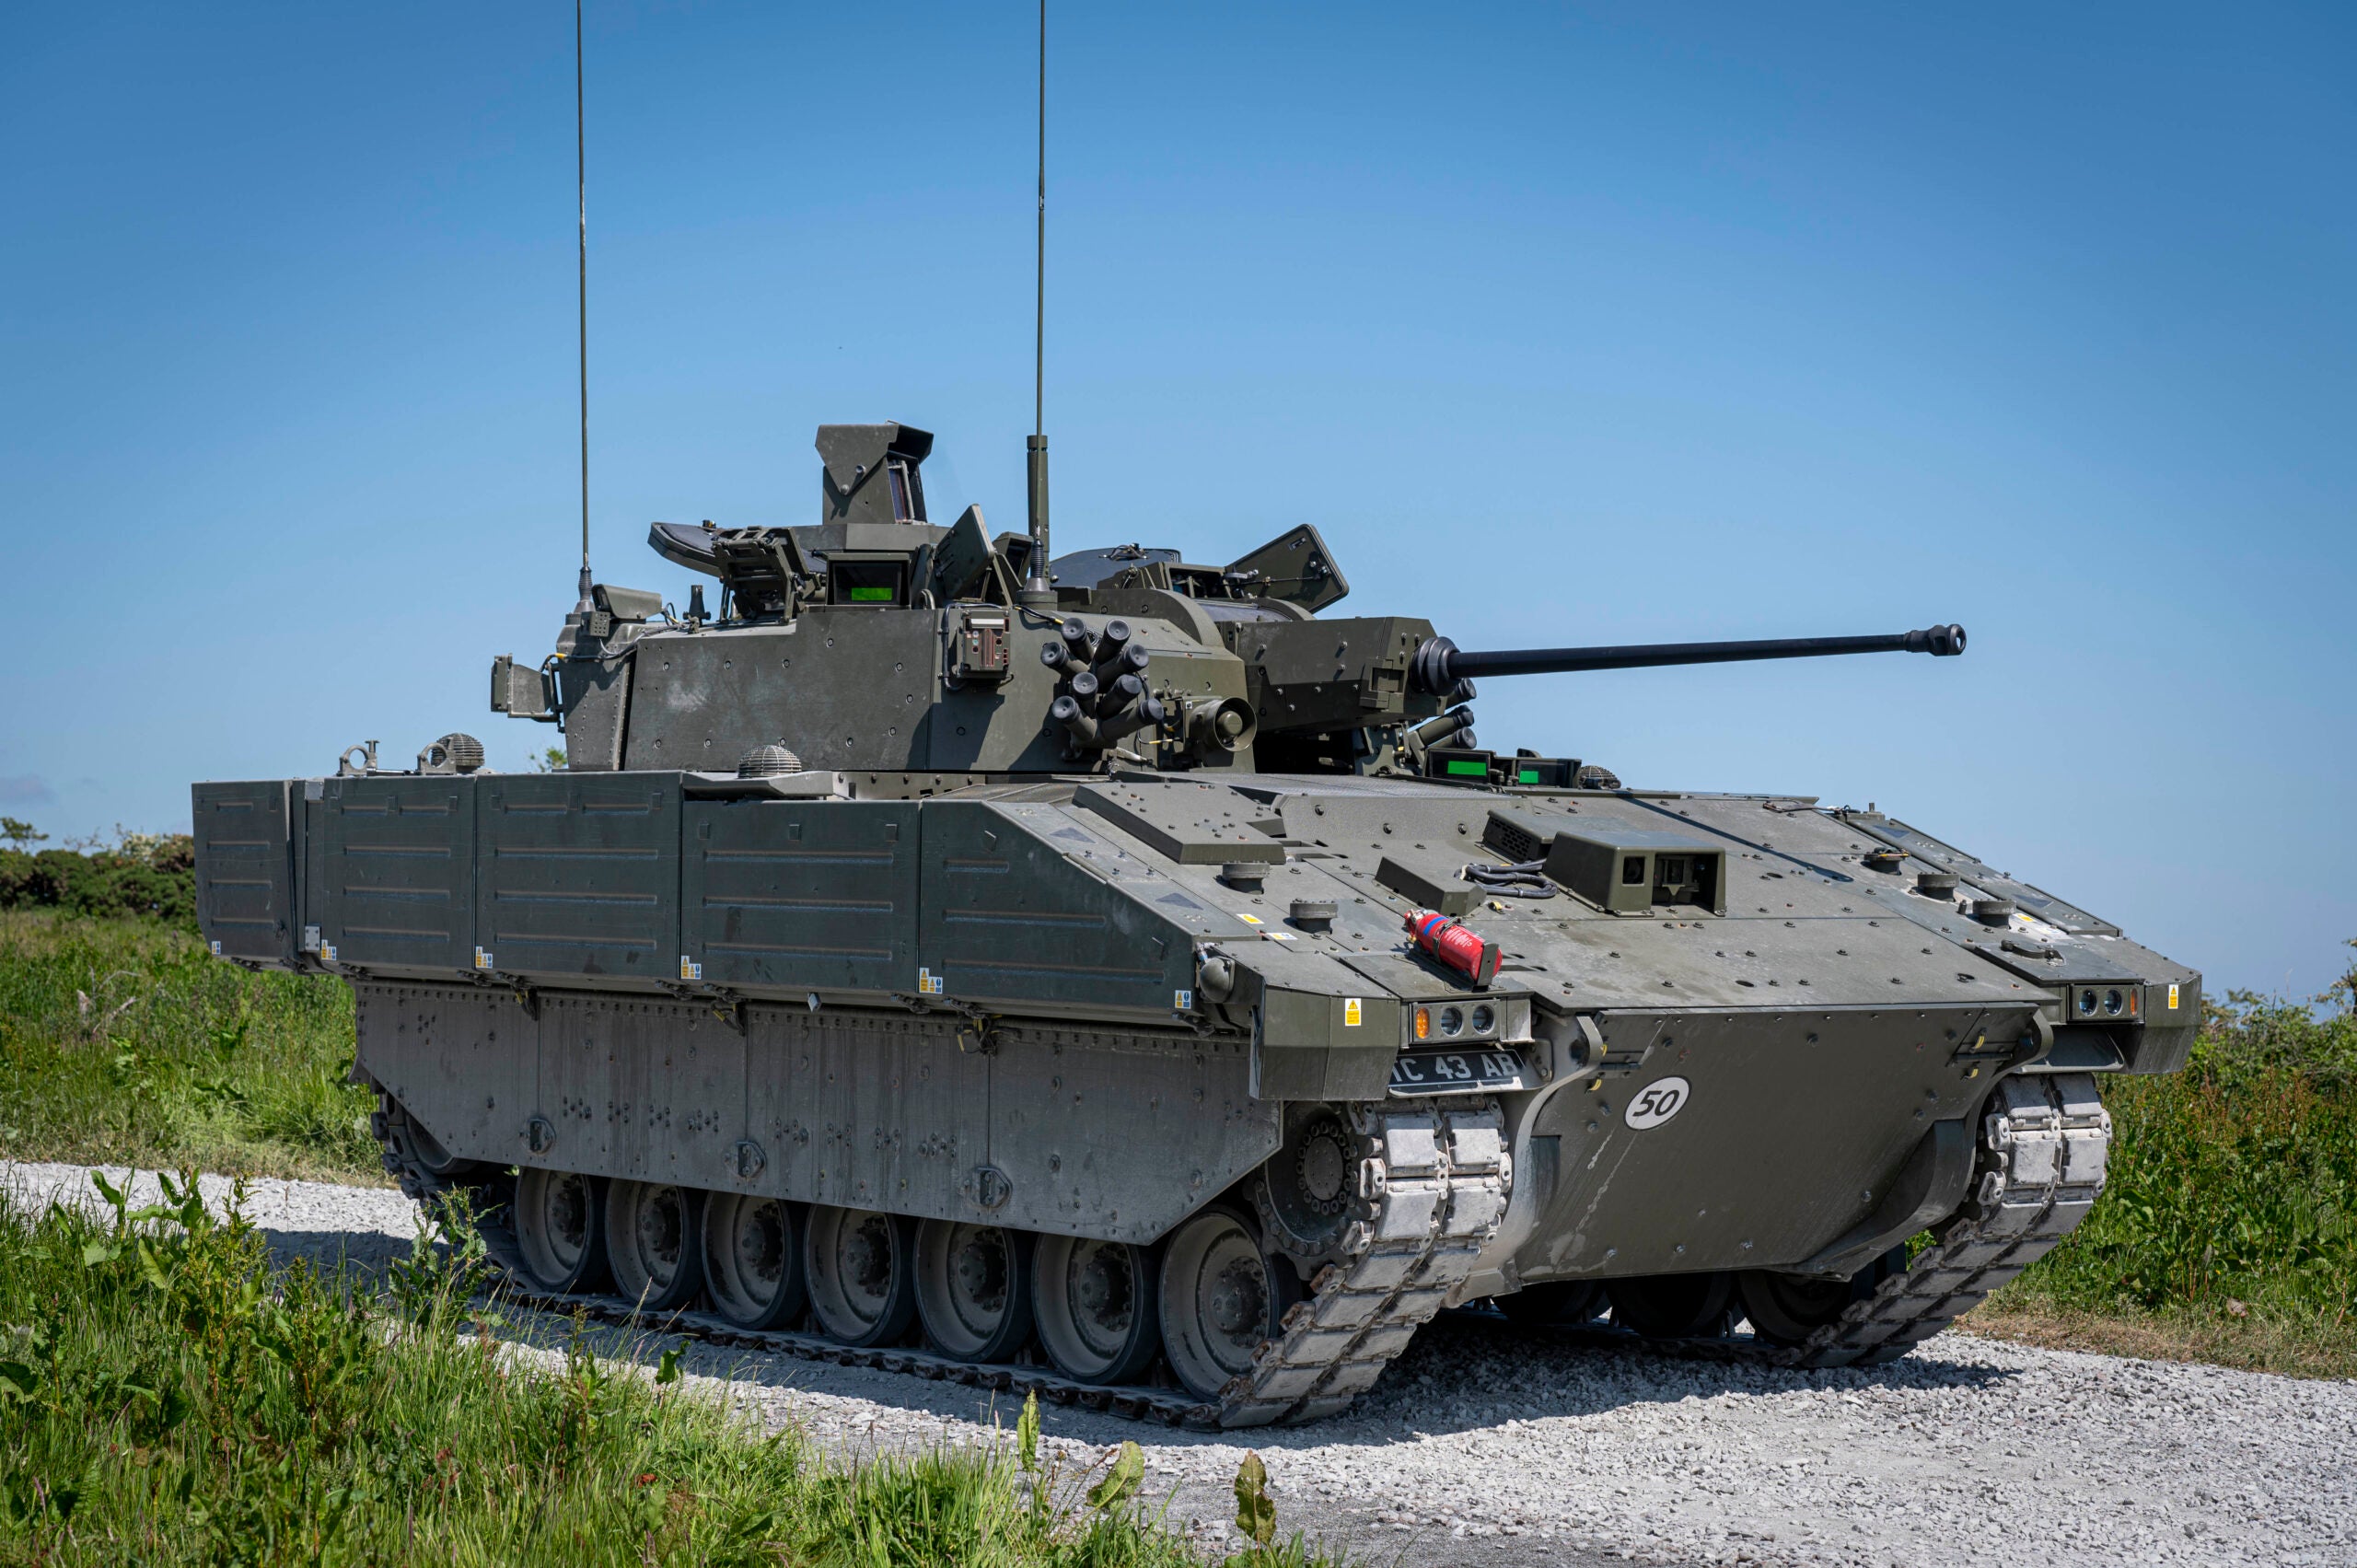 AJAX is put through its paces at Kirkcudbright Ranges in Scotland. The vehicle which is yet to enter service is in the final stages of testing before being handed over to Service use.

Ajax is an advanced, fully digitised, land vehicle system delivering transformational change in capability to the British Army. There are six variants in the Ajax family, all based upon a common base platform.